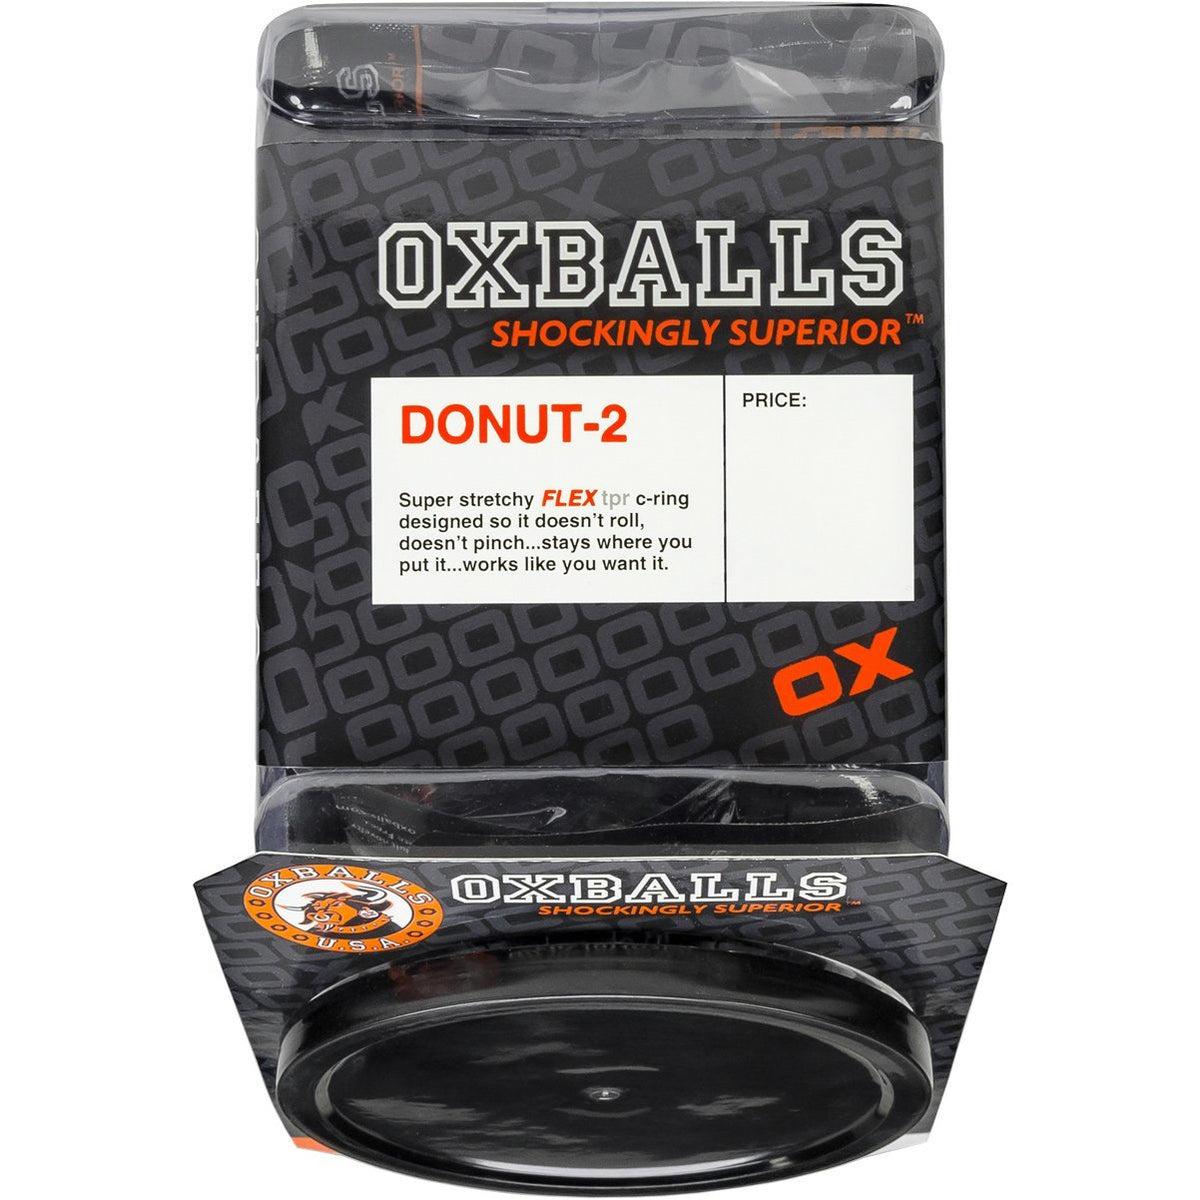 Oxballs Donut 2 Jelly Cockrings – Display of 20